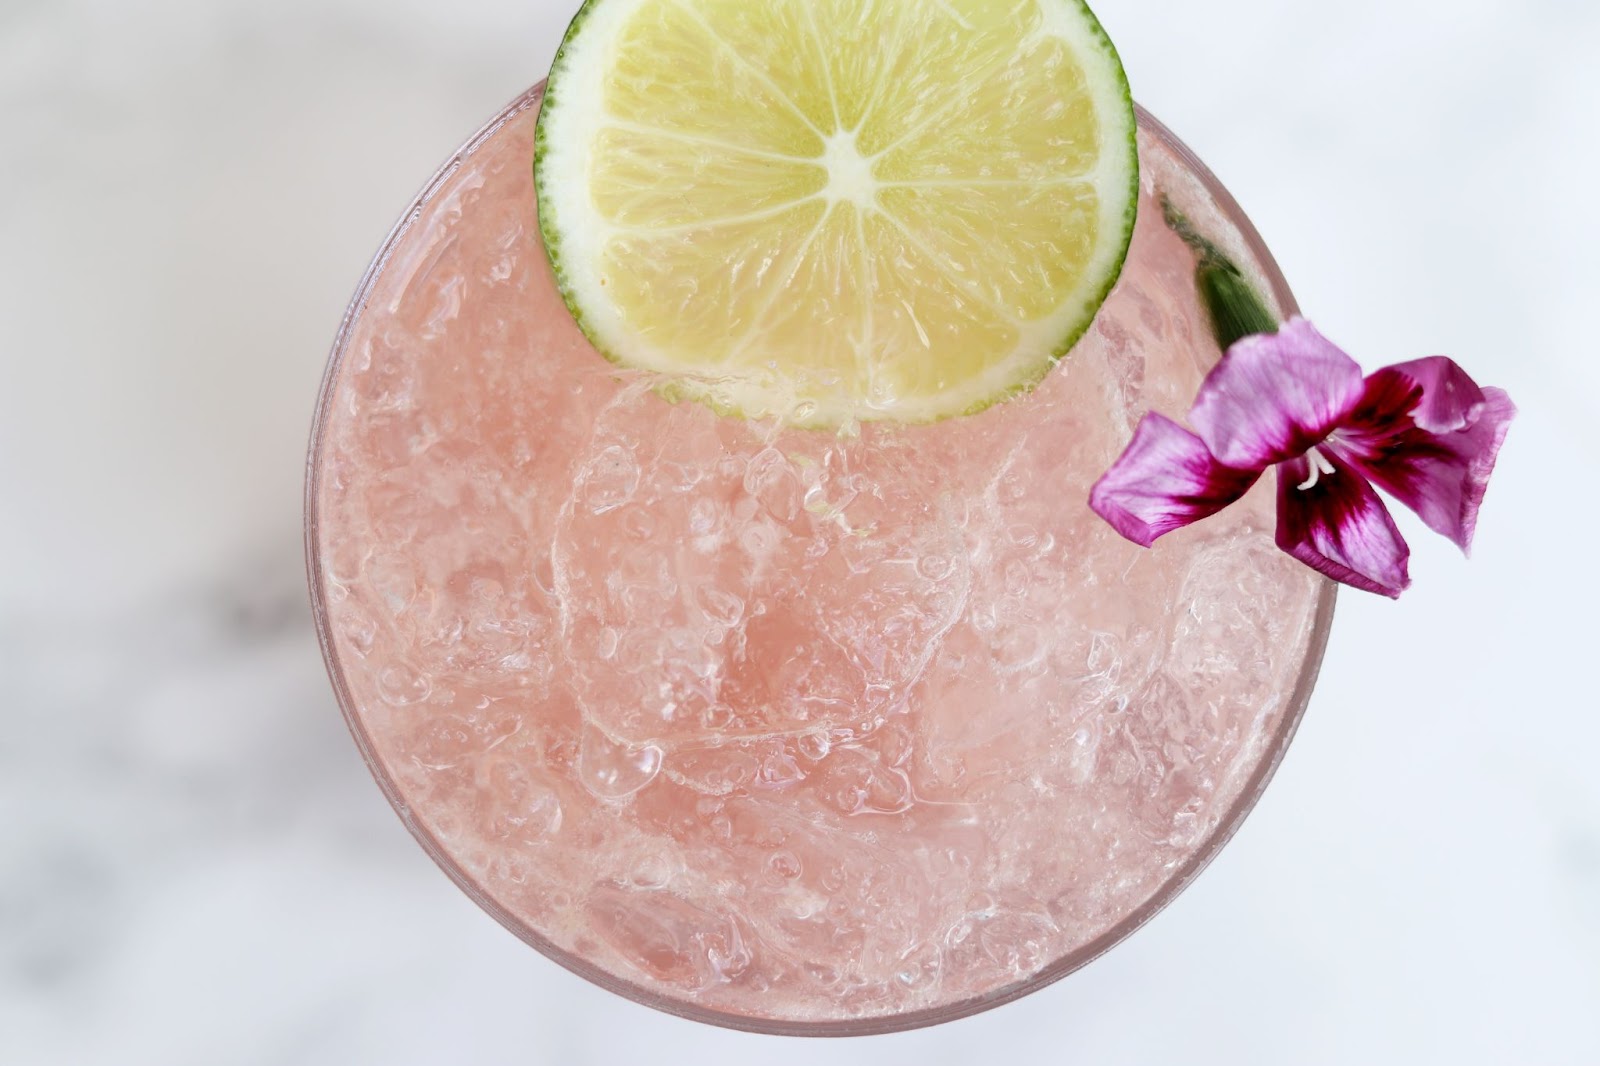 floral mocktail recipes to try- image1